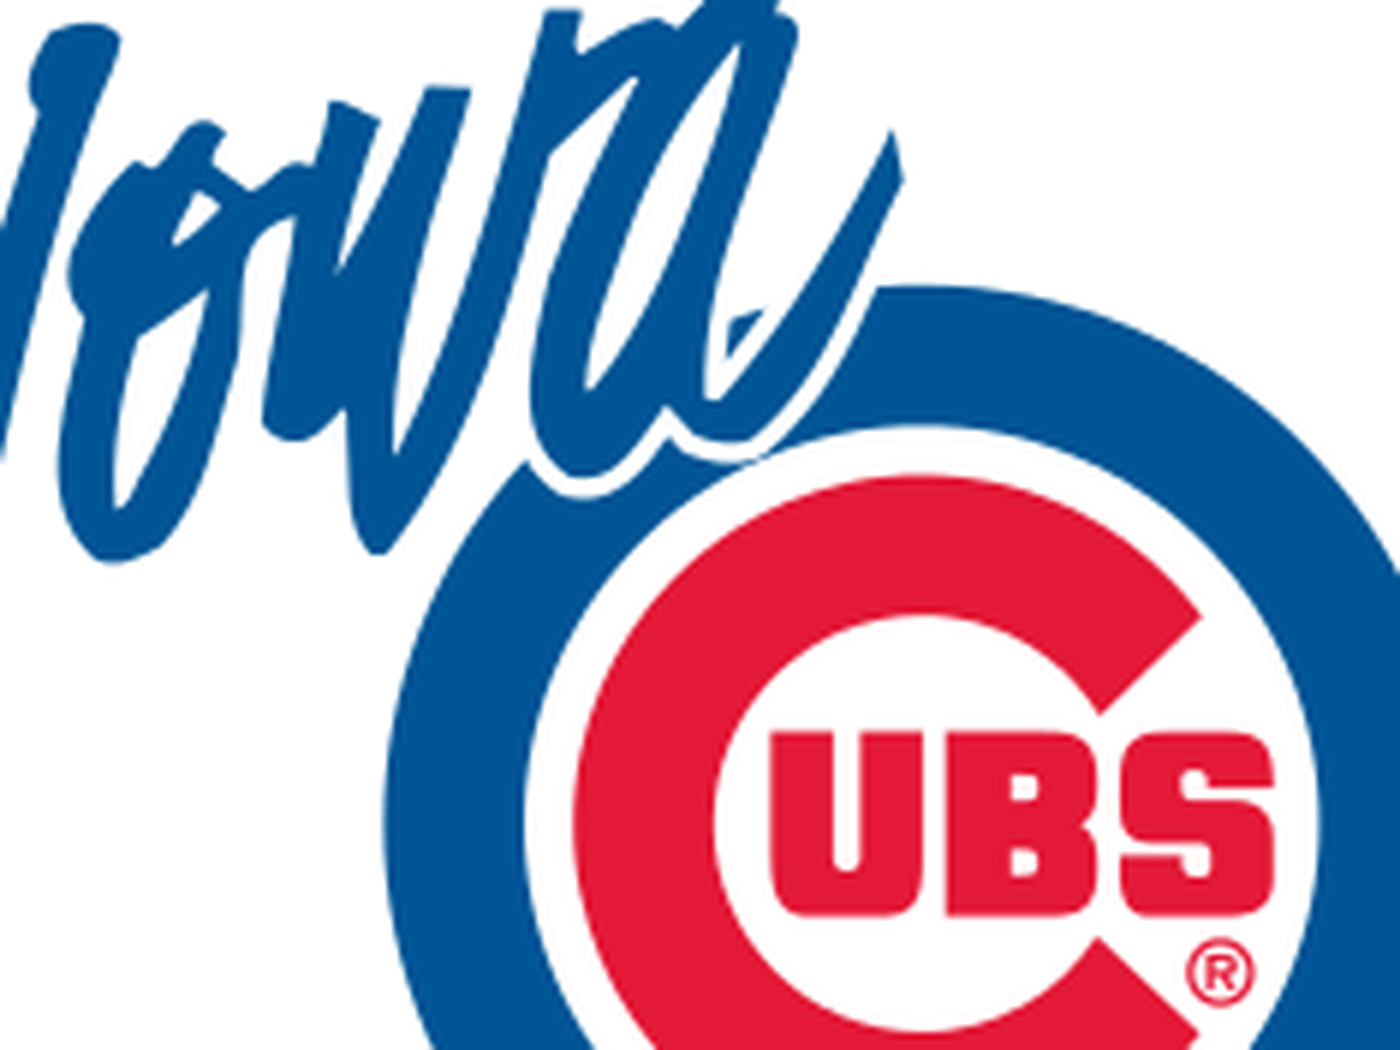 Get To Know The Iowa Cubs Cubbie Blue